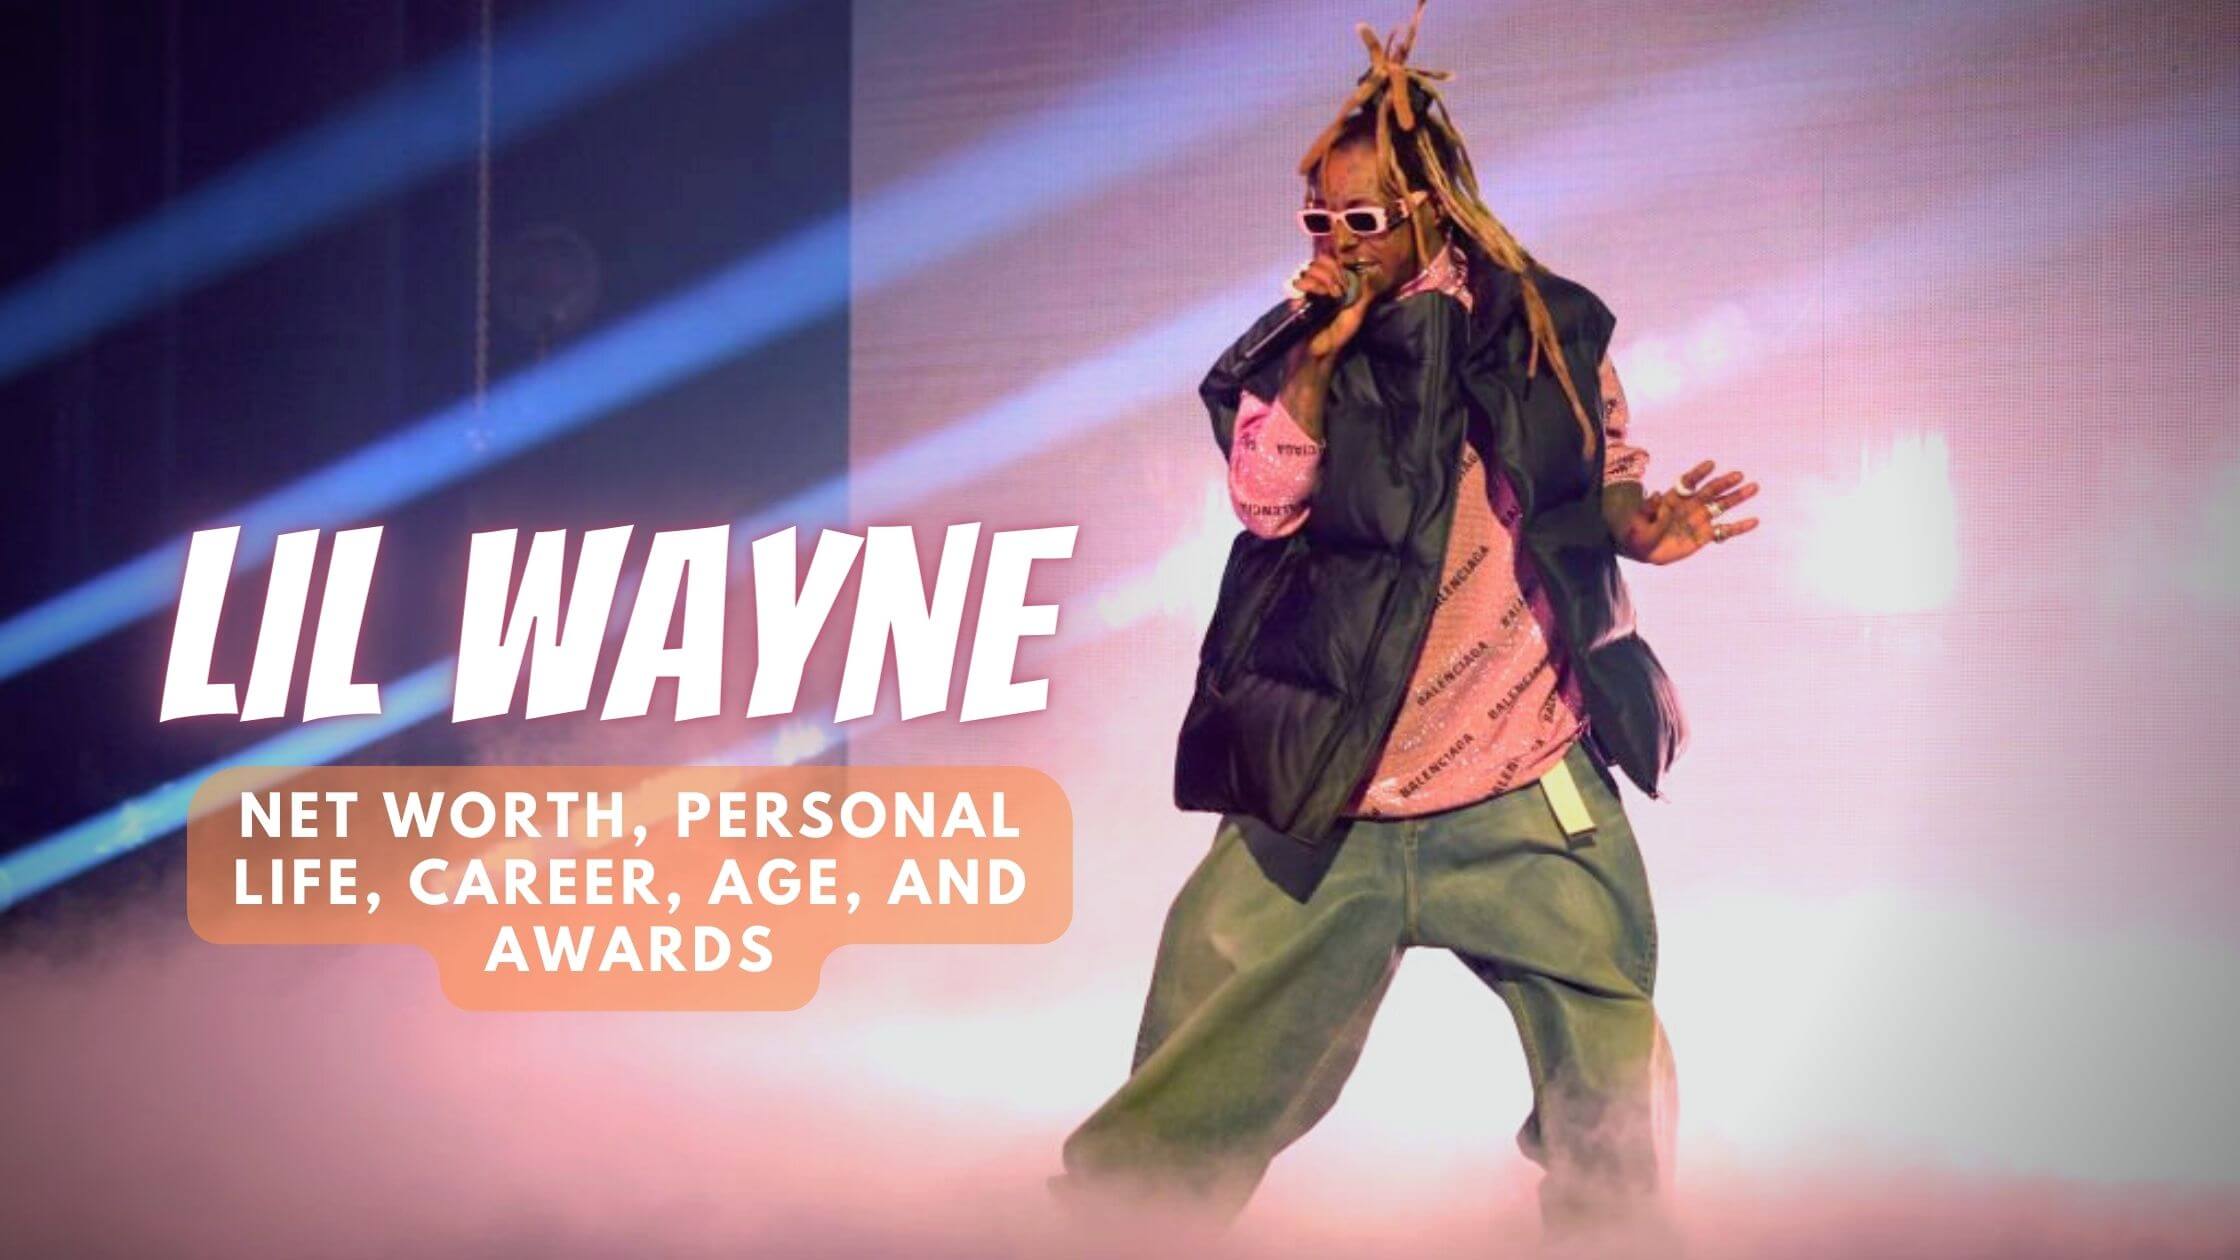 Lil Wayne Net Worth, Personal Life, Career, Age, And Awards